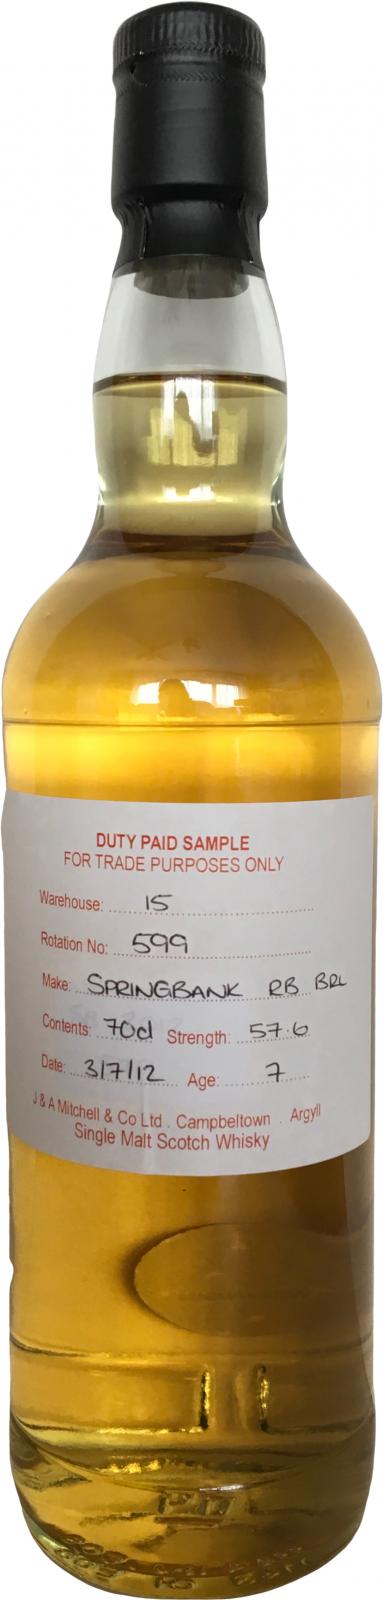 Springbank 2012 Duty Paid Sample For Trade Purposes Only Refill Bourbon Barrel Rotation 599 57.6% 700ml